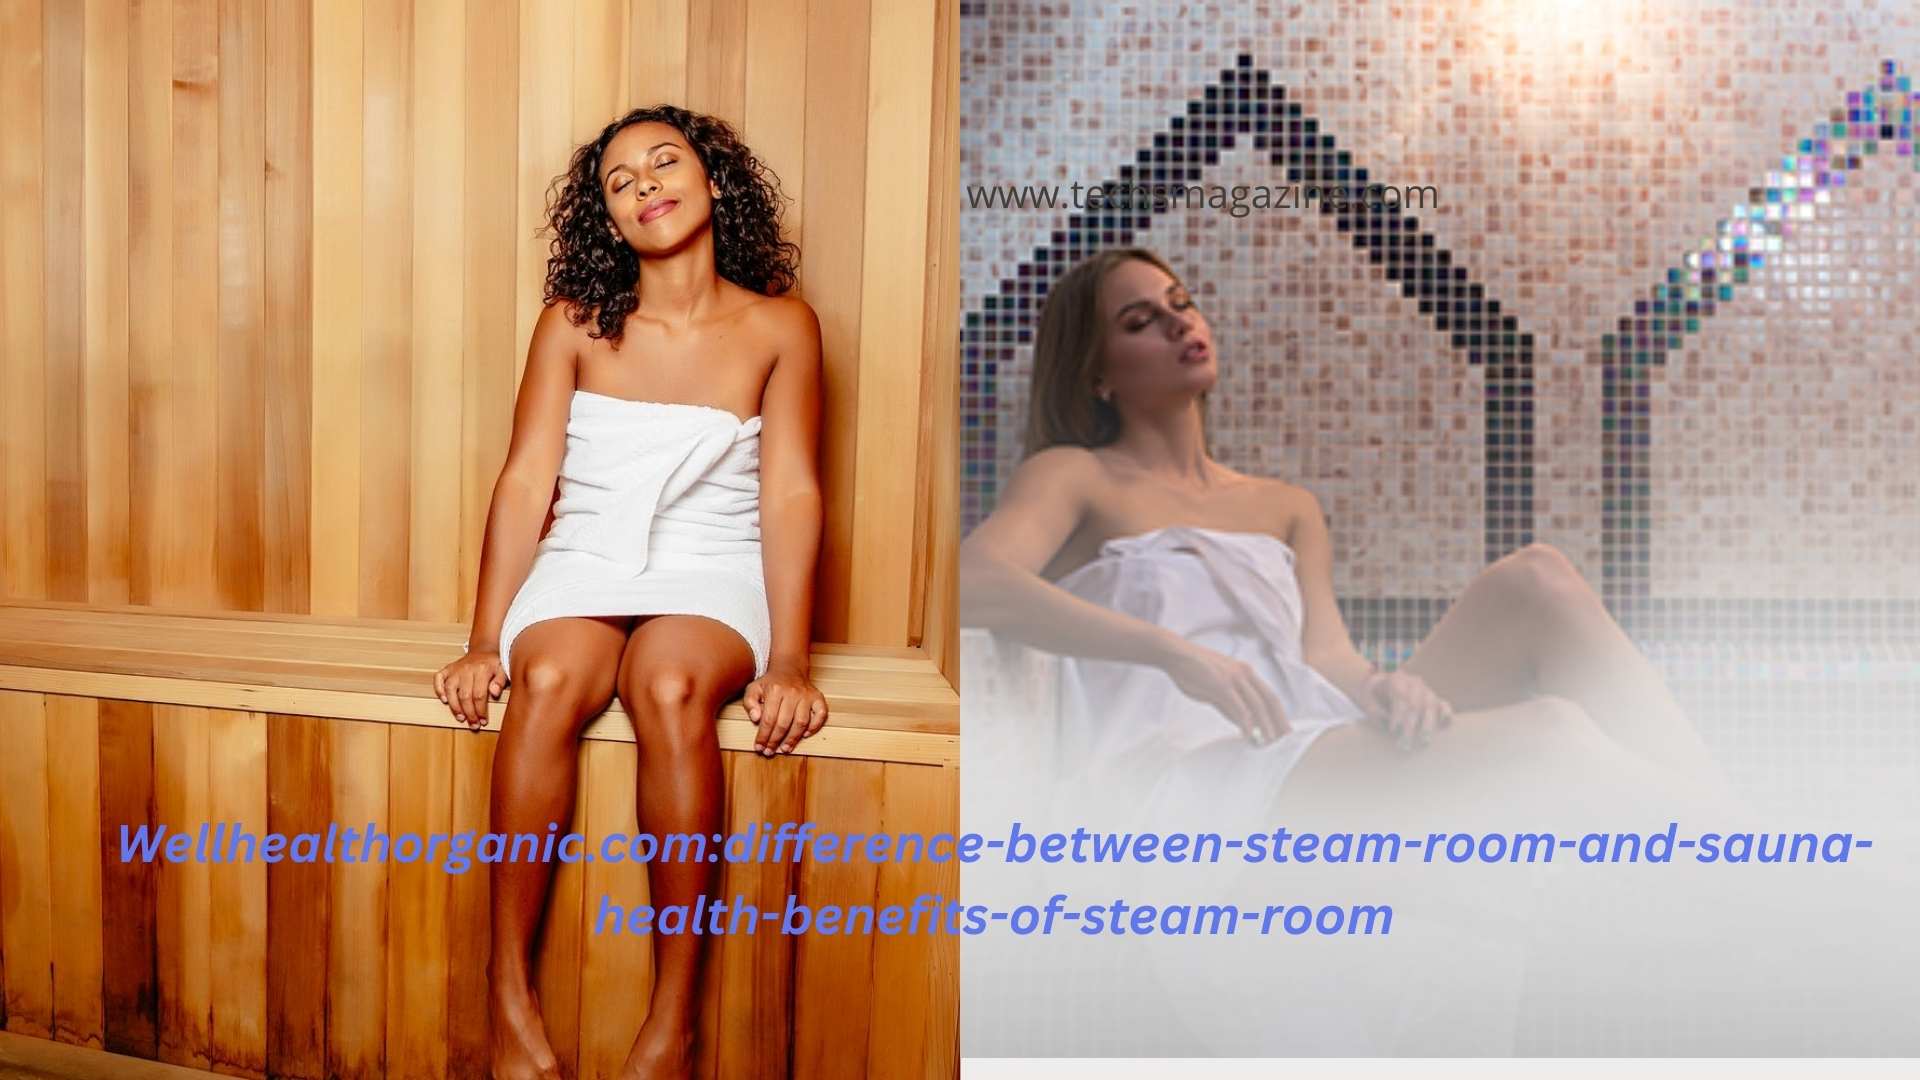 Wellhealthorganic.com:difference-between-steam-room-and-sauna-health-benefits-of-steam-room